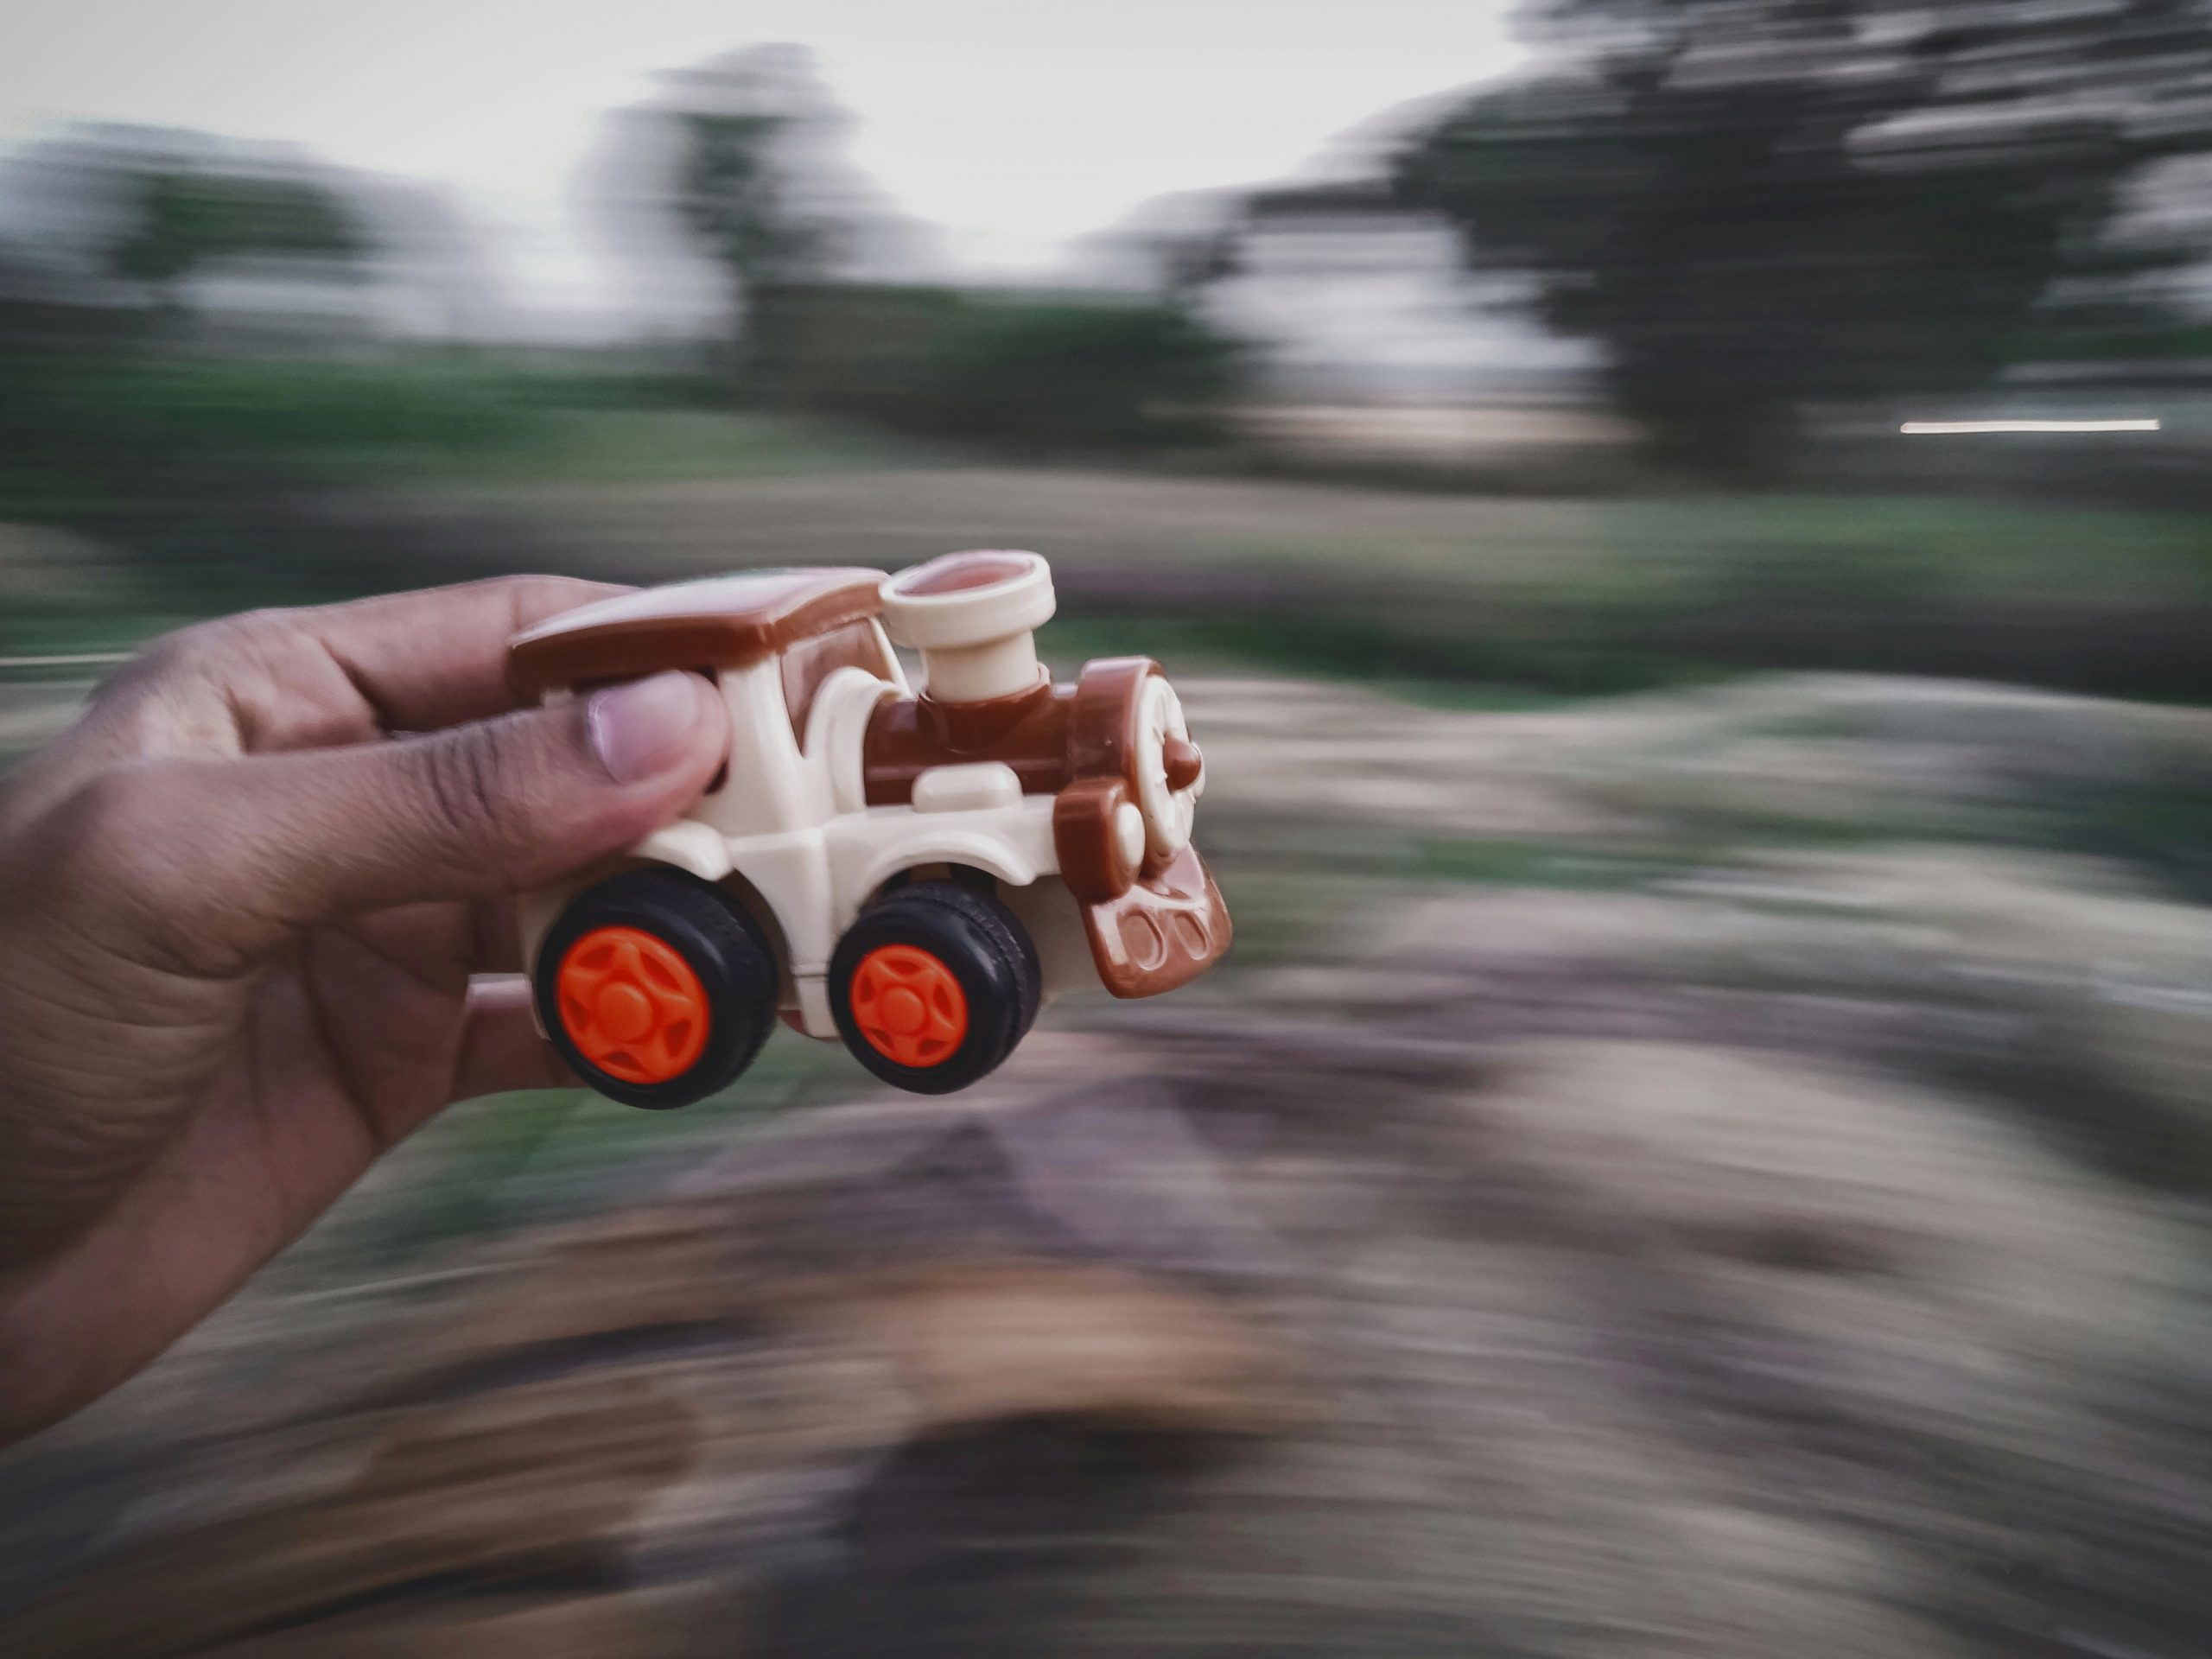 Toy train with blurry background